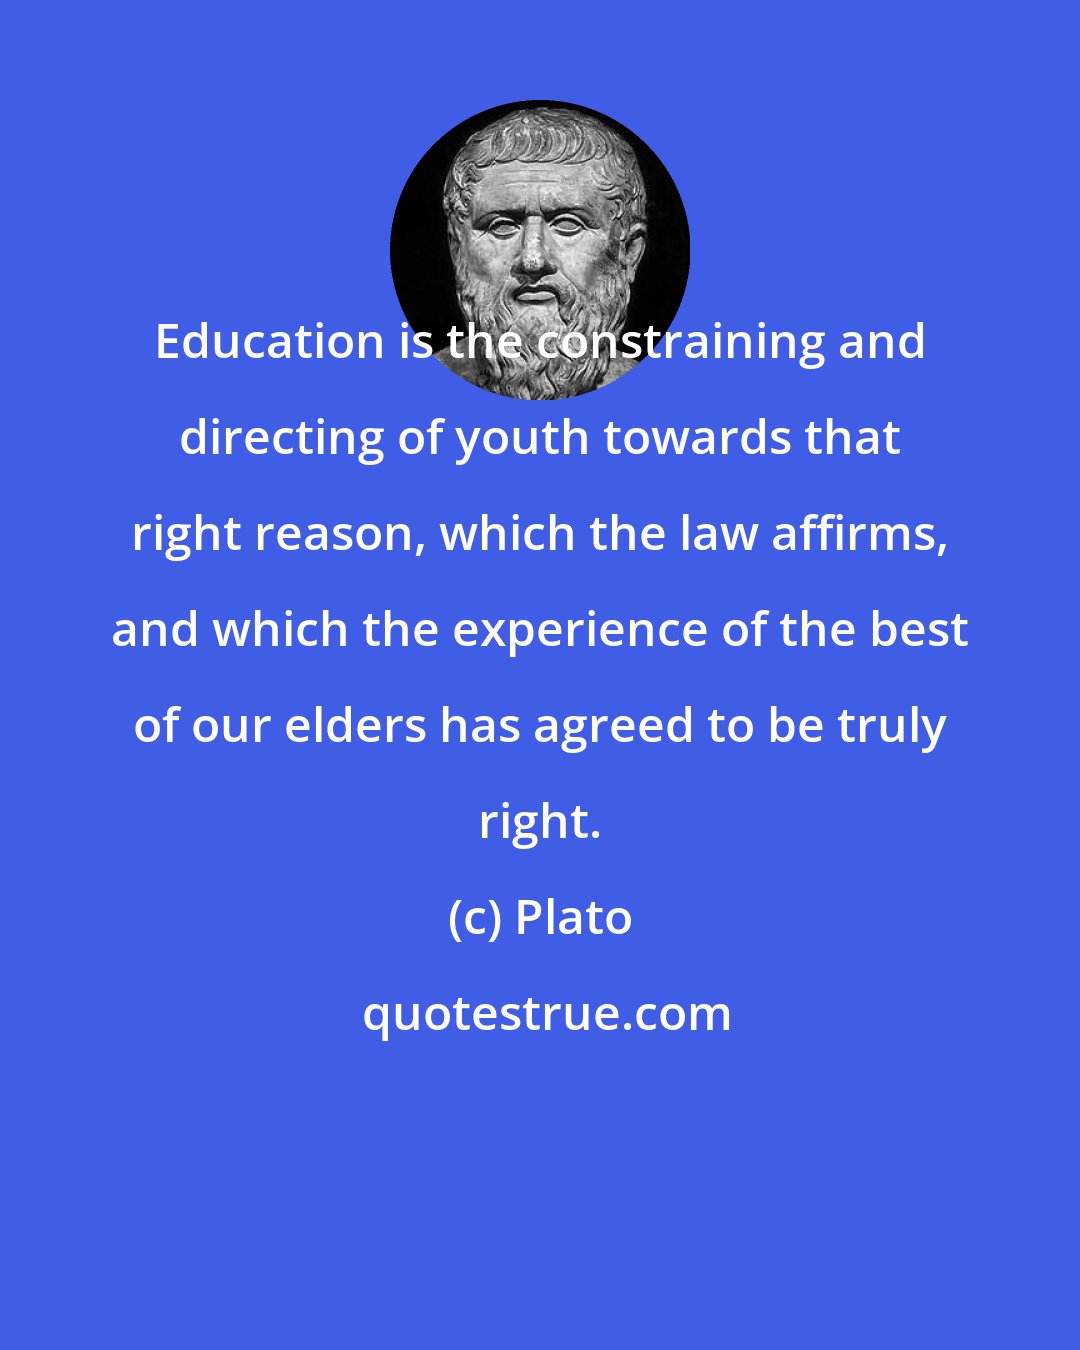 Plato: Education is the constraining and directing of youth towards that right reason, which the law affirms, and which the experience of the best of our elders has agreed to be truly right.